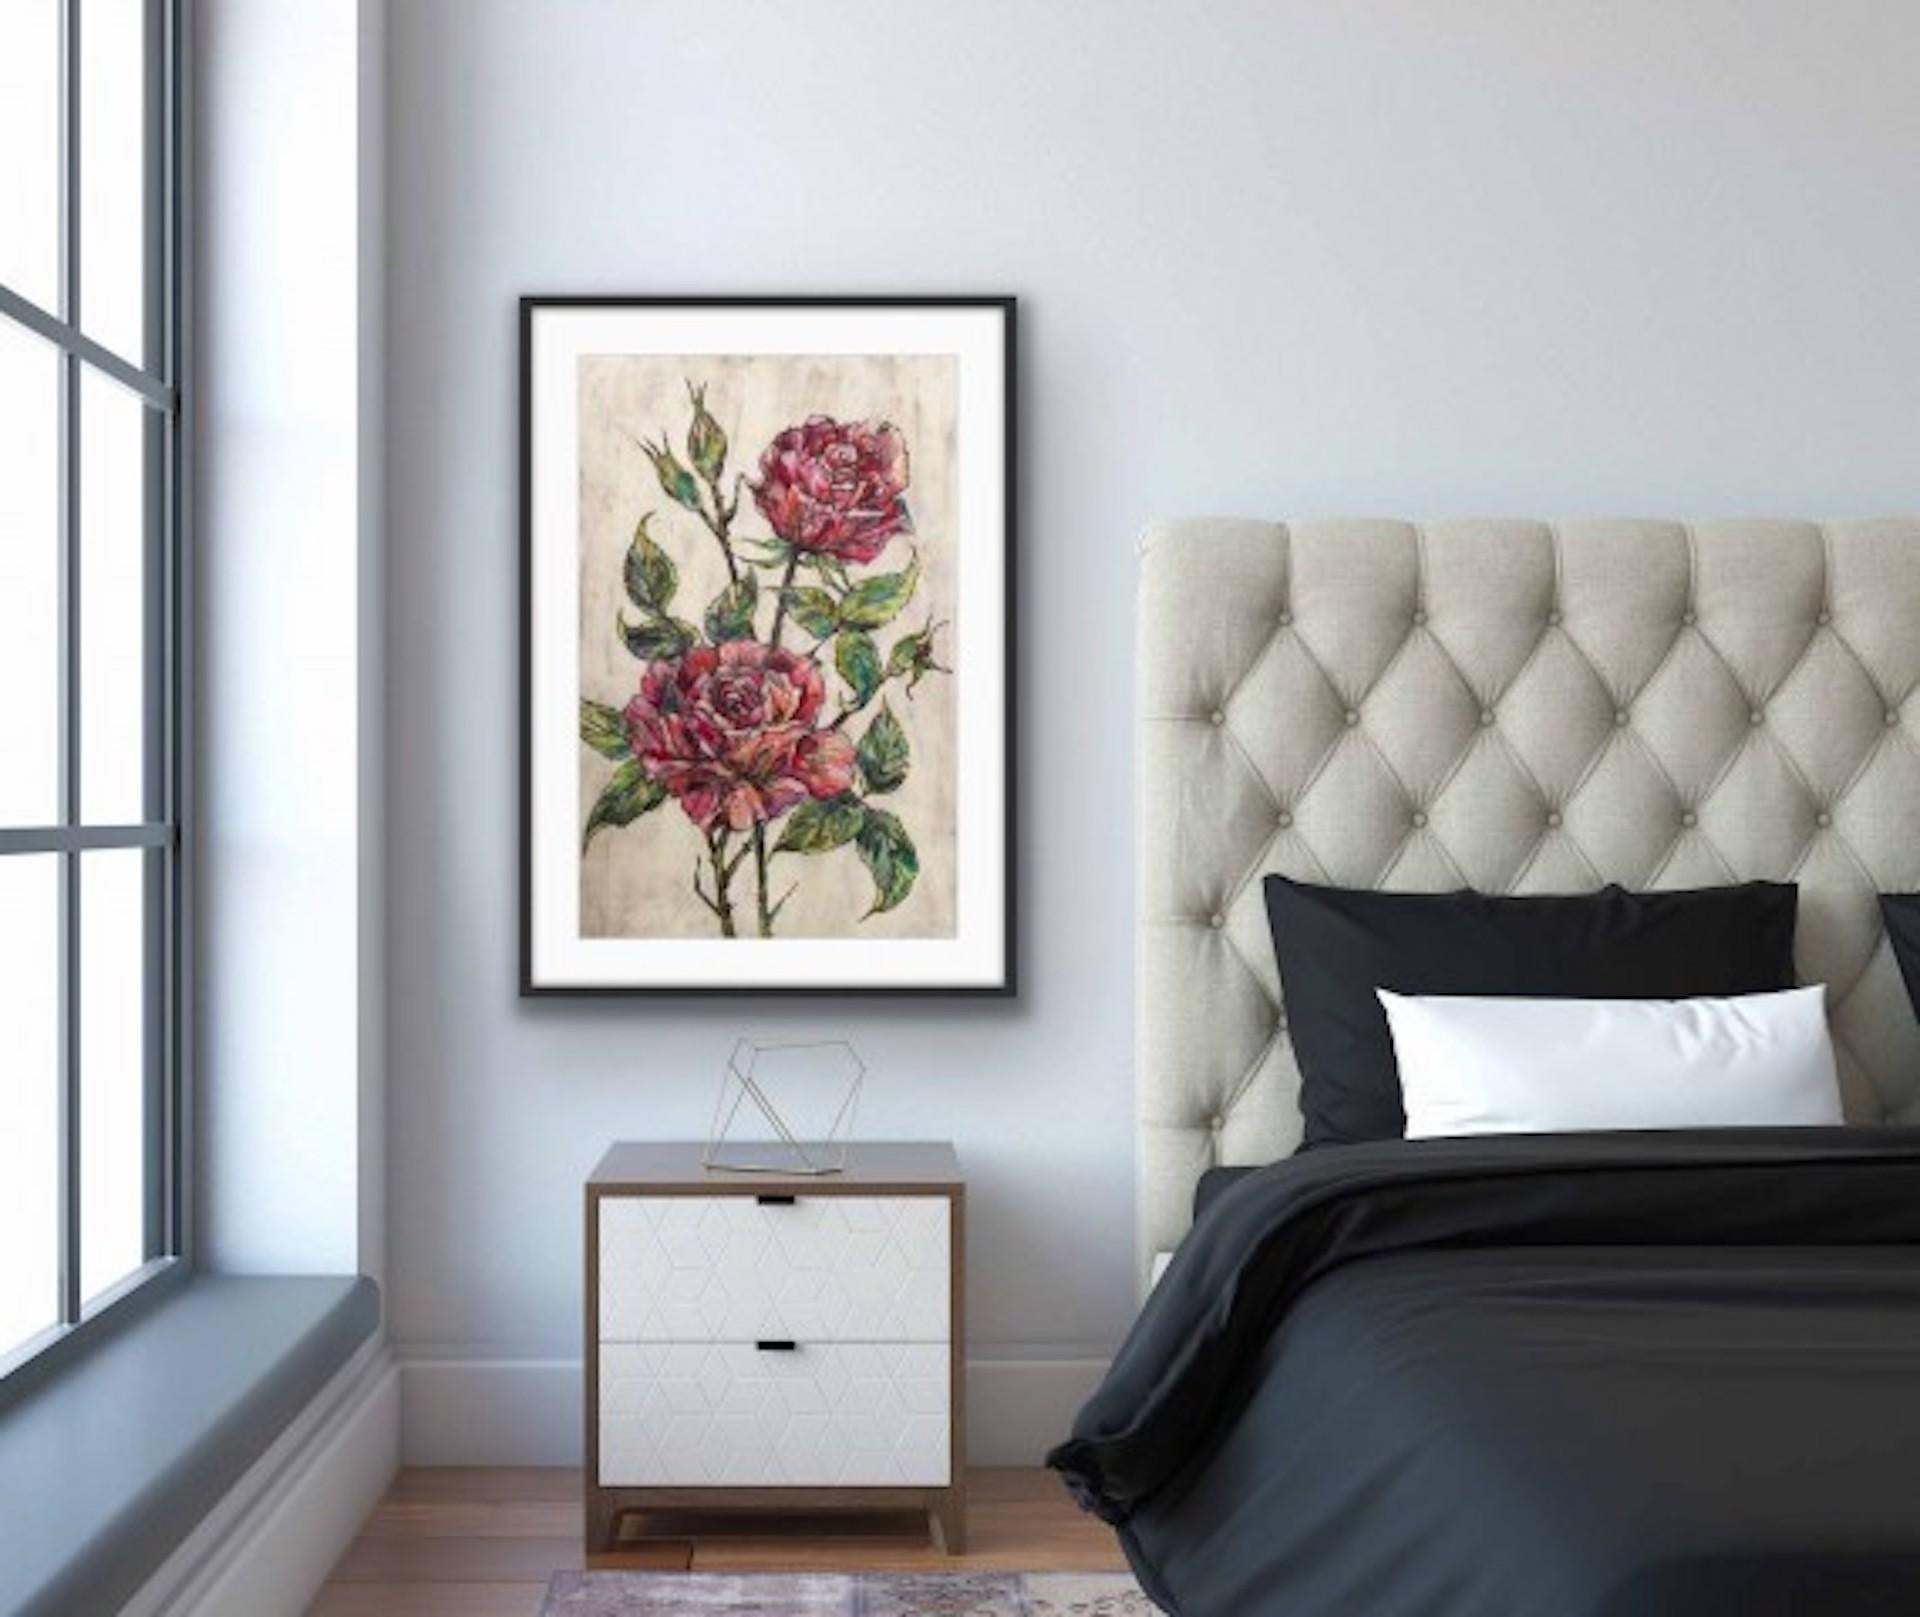 Garden Roses by Vicky Oldfield [2019]
Limited Edition
Collagraph
Edition of 20
Image size: H:90 cm x W:60 cm
Complete Size of Unframed Work: H:102 cm x W:72 cm x D:0.1cm
Sold Unframed
Please note that insitu images are purely an indication of how a